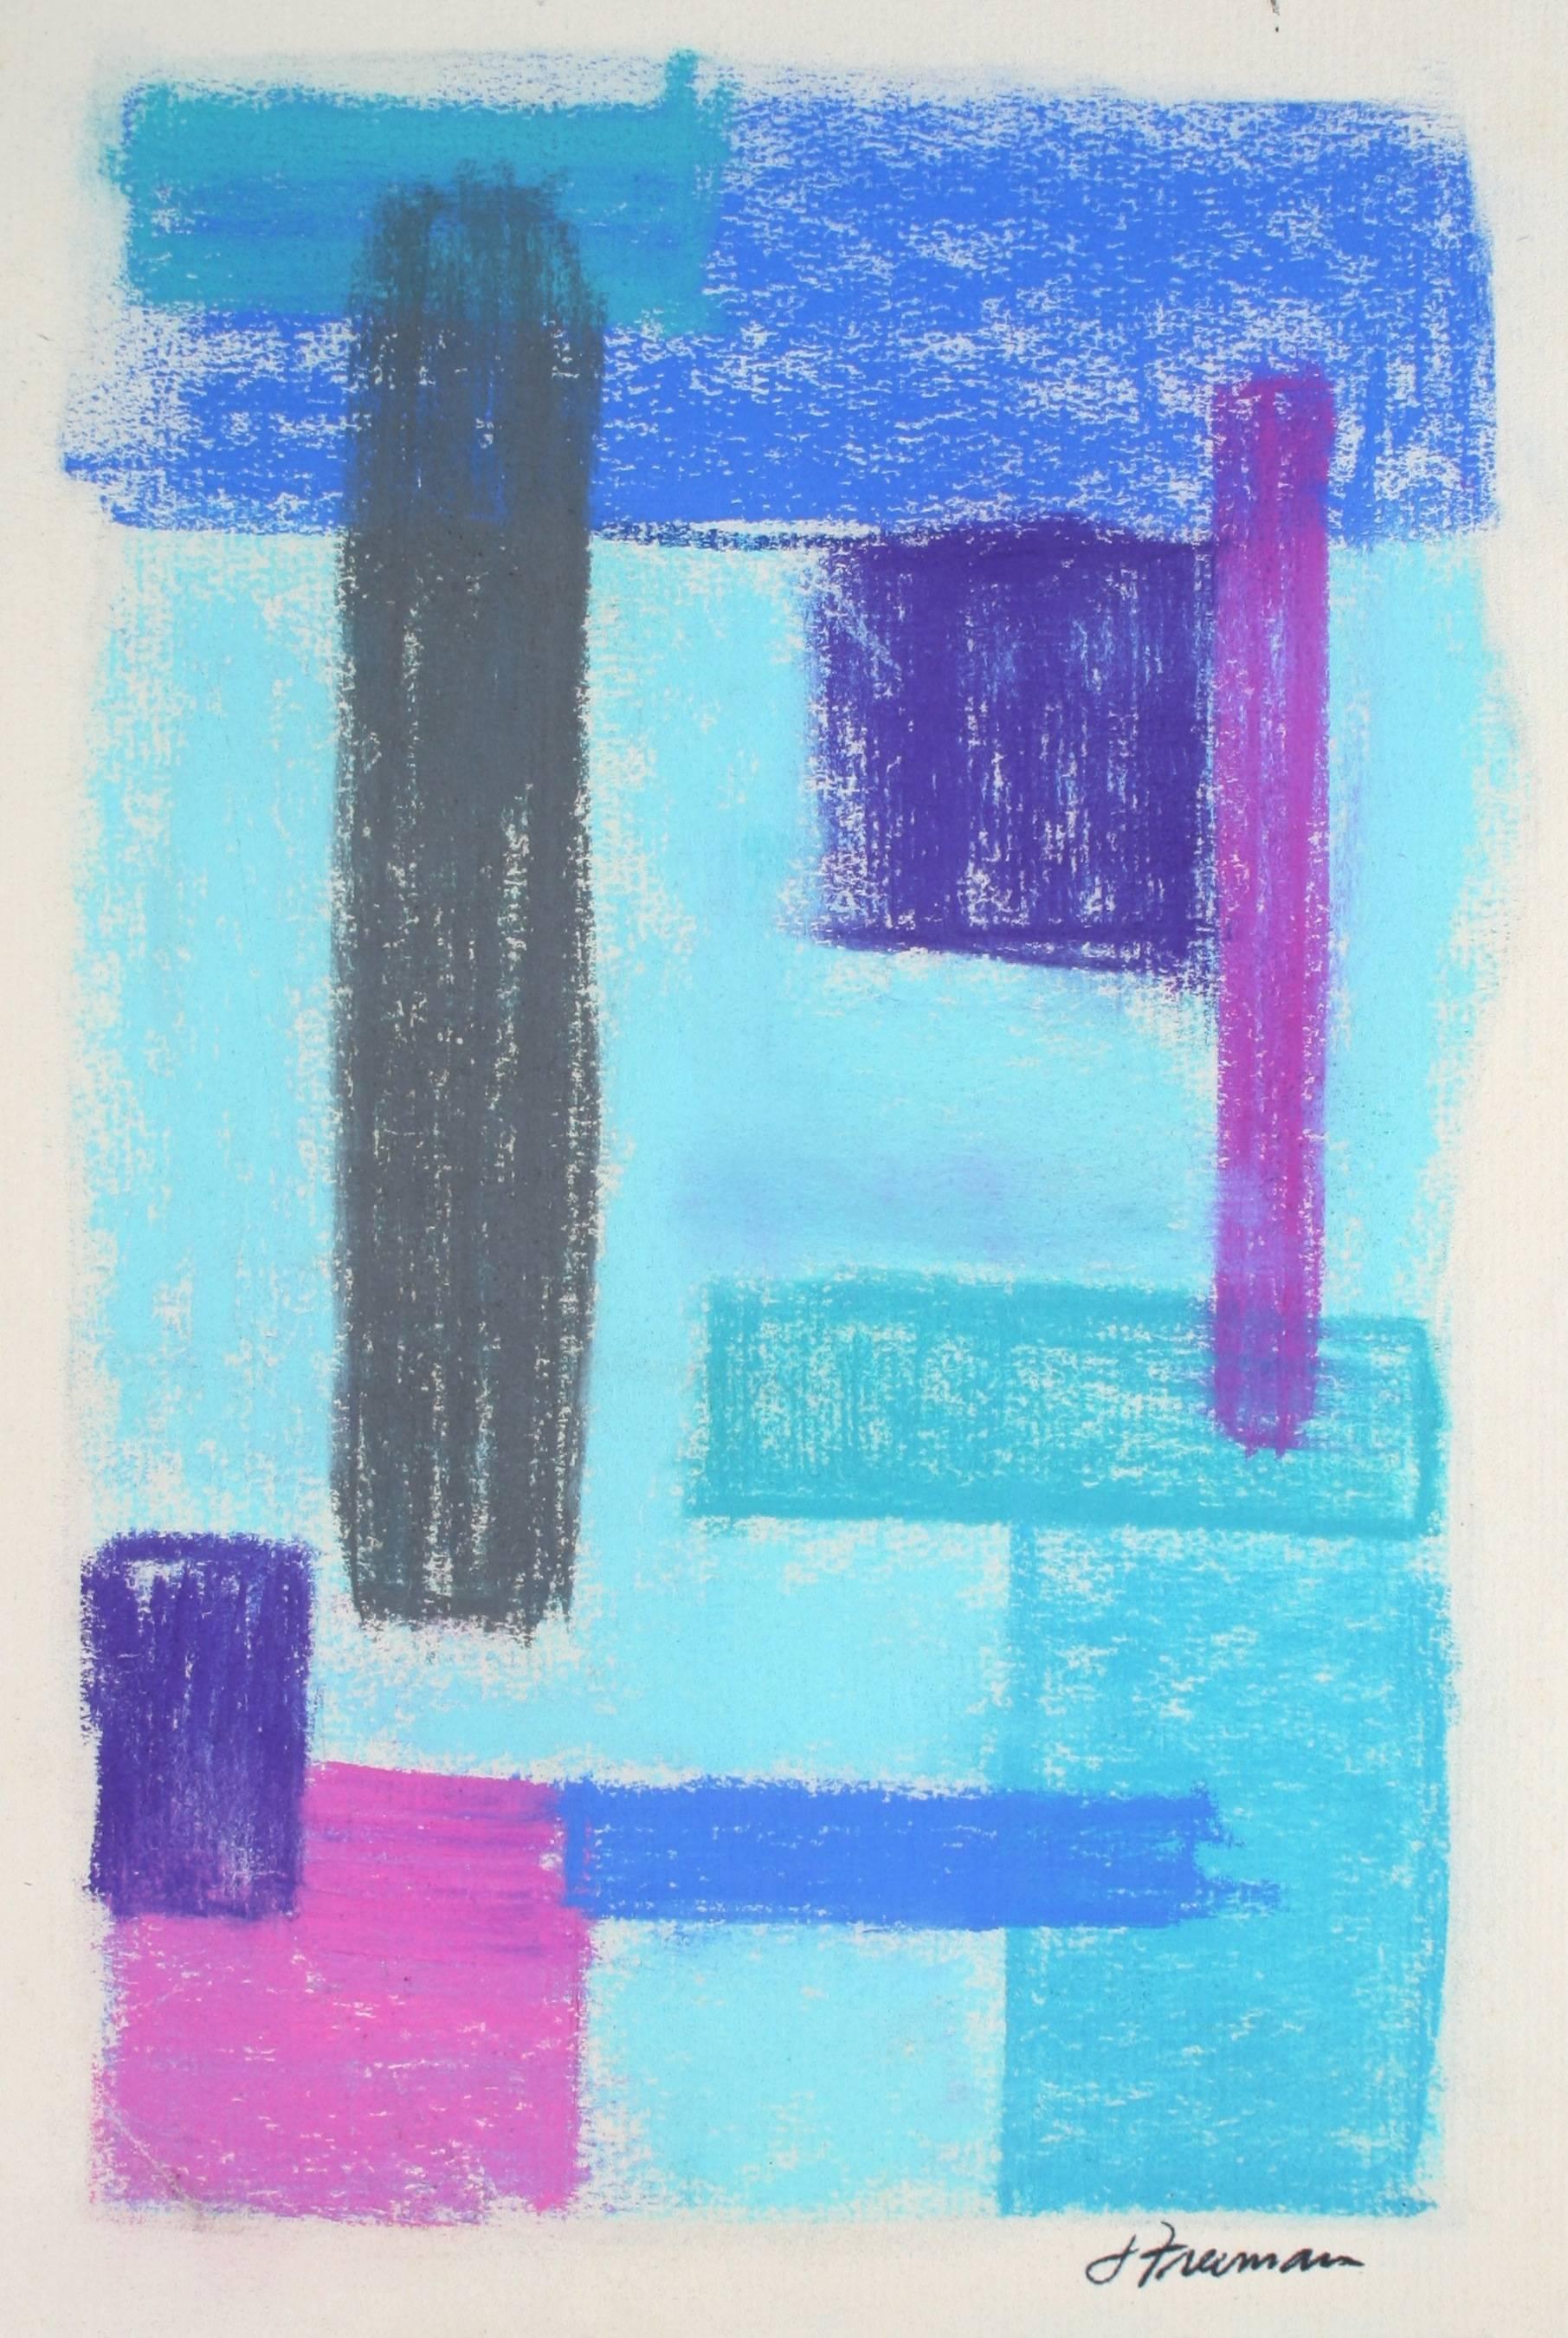 Jack Freeman Abstract Drawing - Geometric Abstract in Blue Pastel, Circa 1960